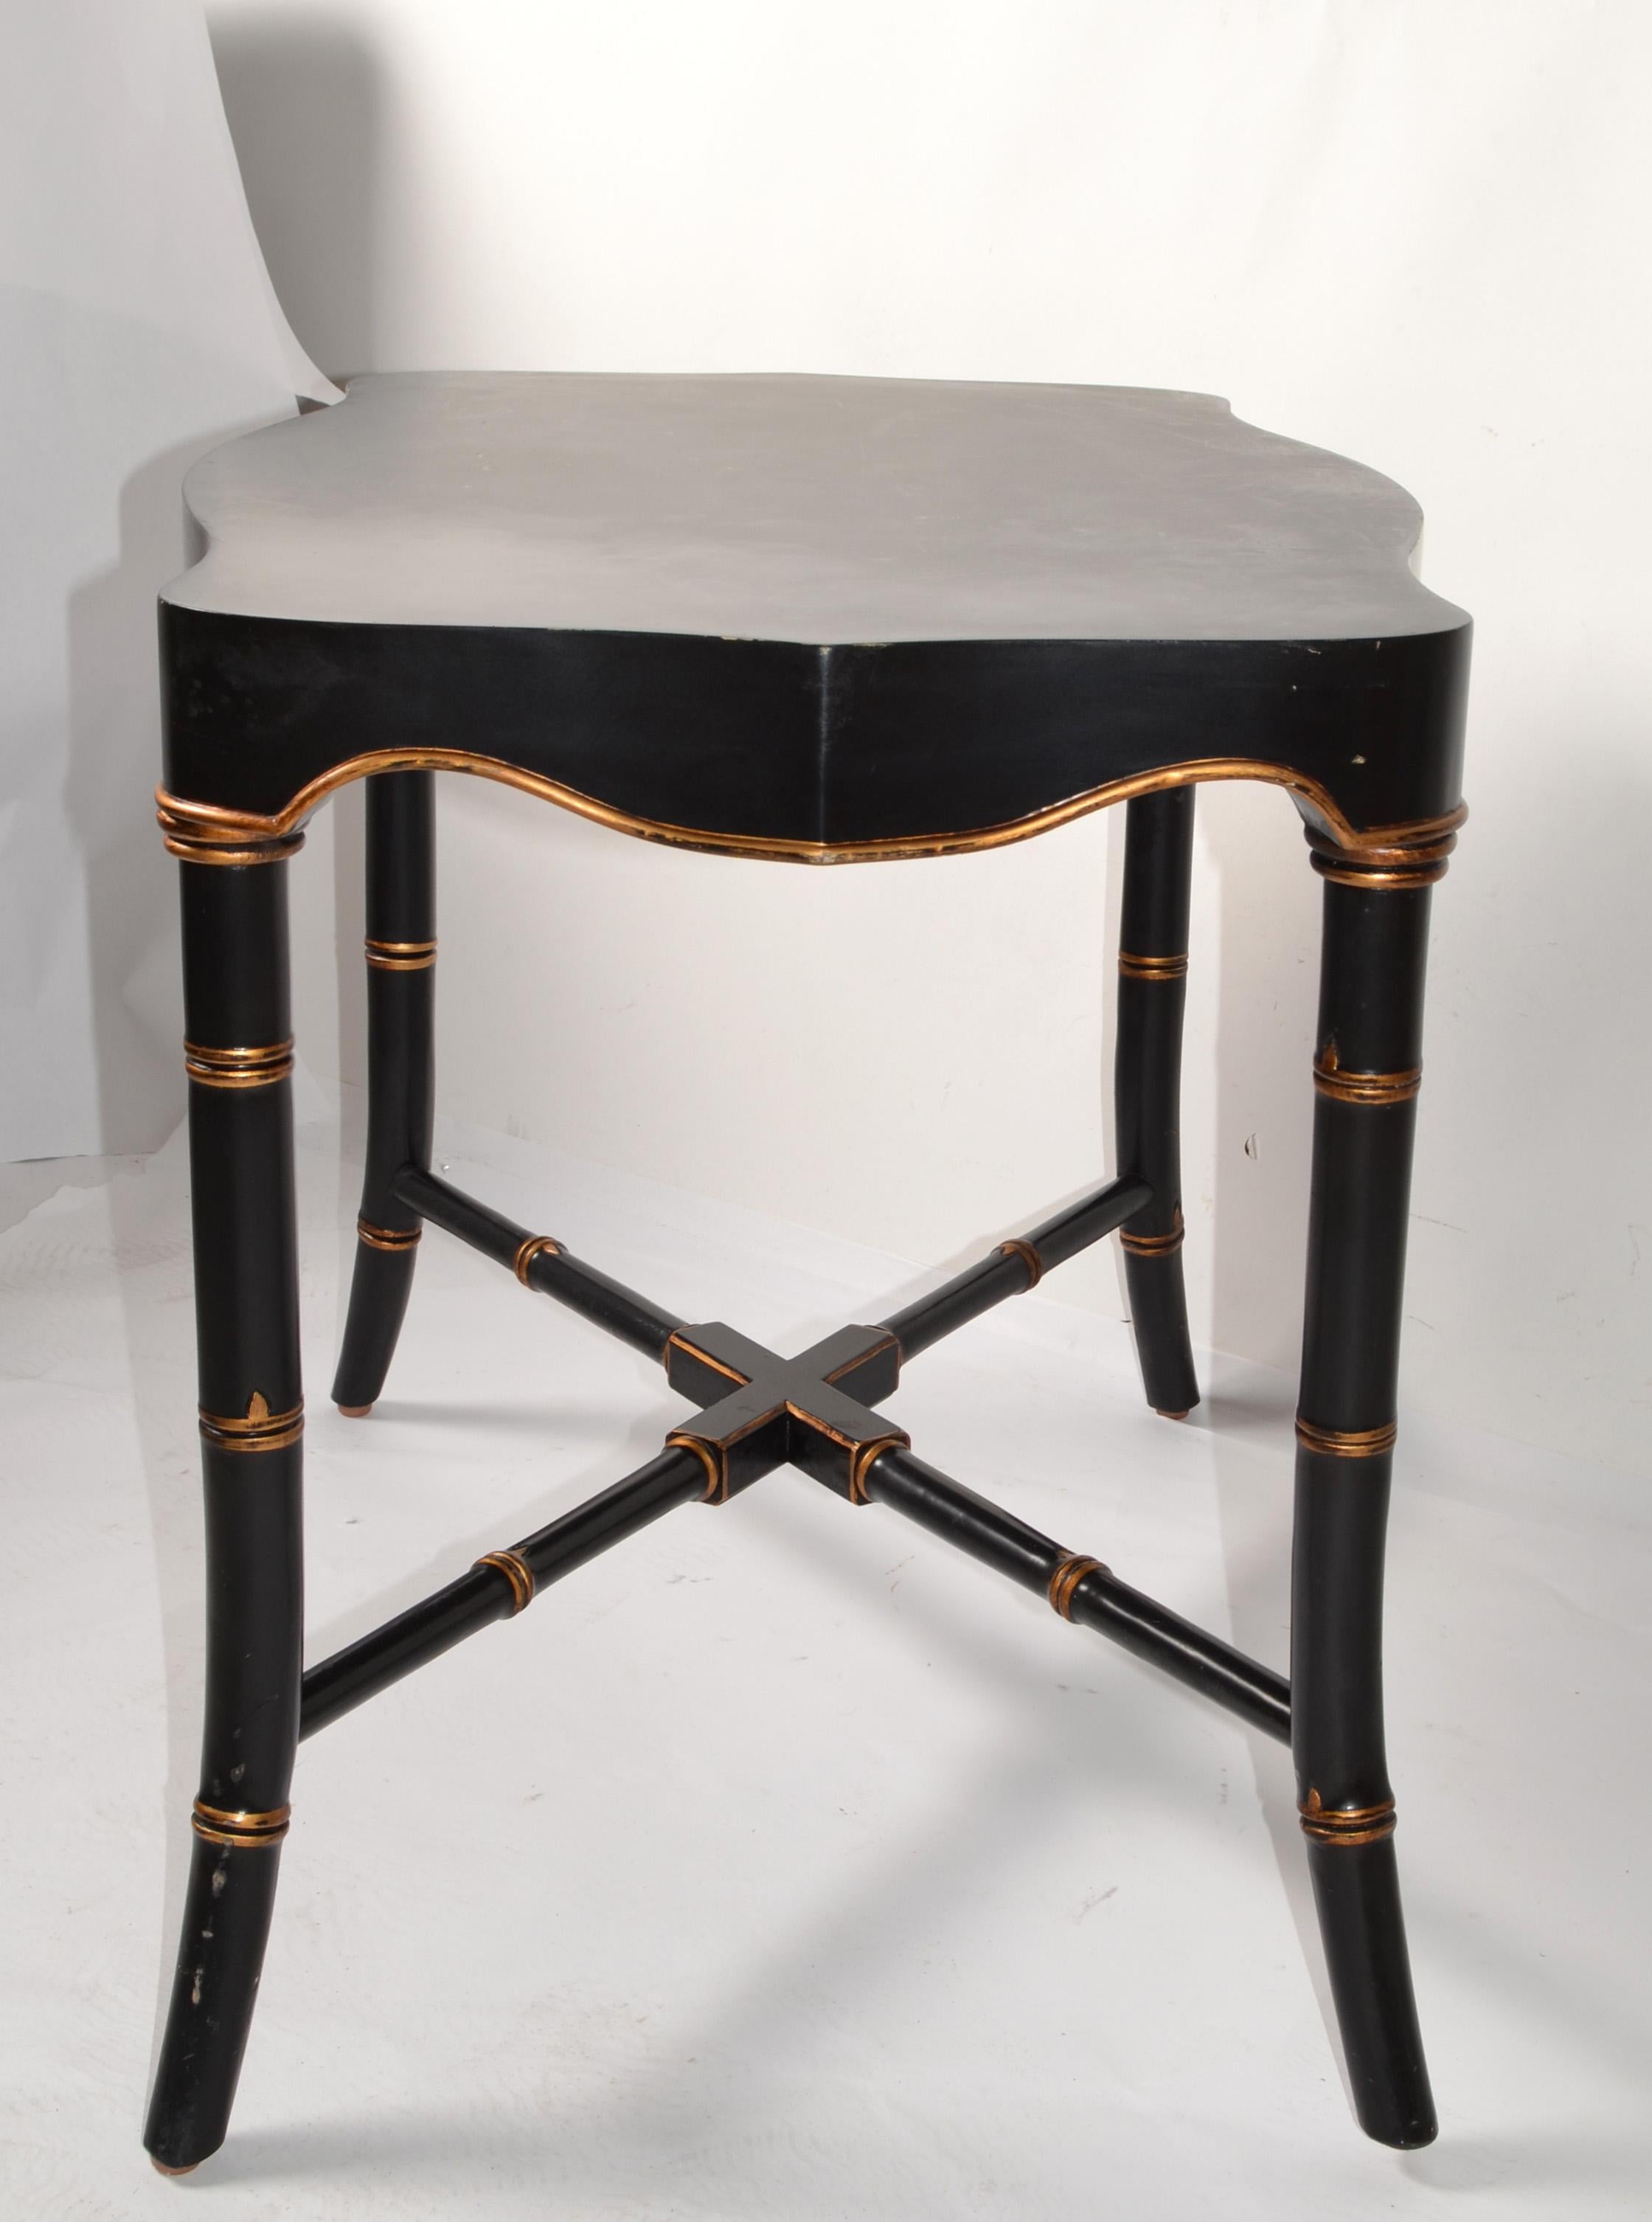 Victorian Mid-20th Century Black Gold Finish Accent Table Faux Bamboo Cross Base For Sale 10